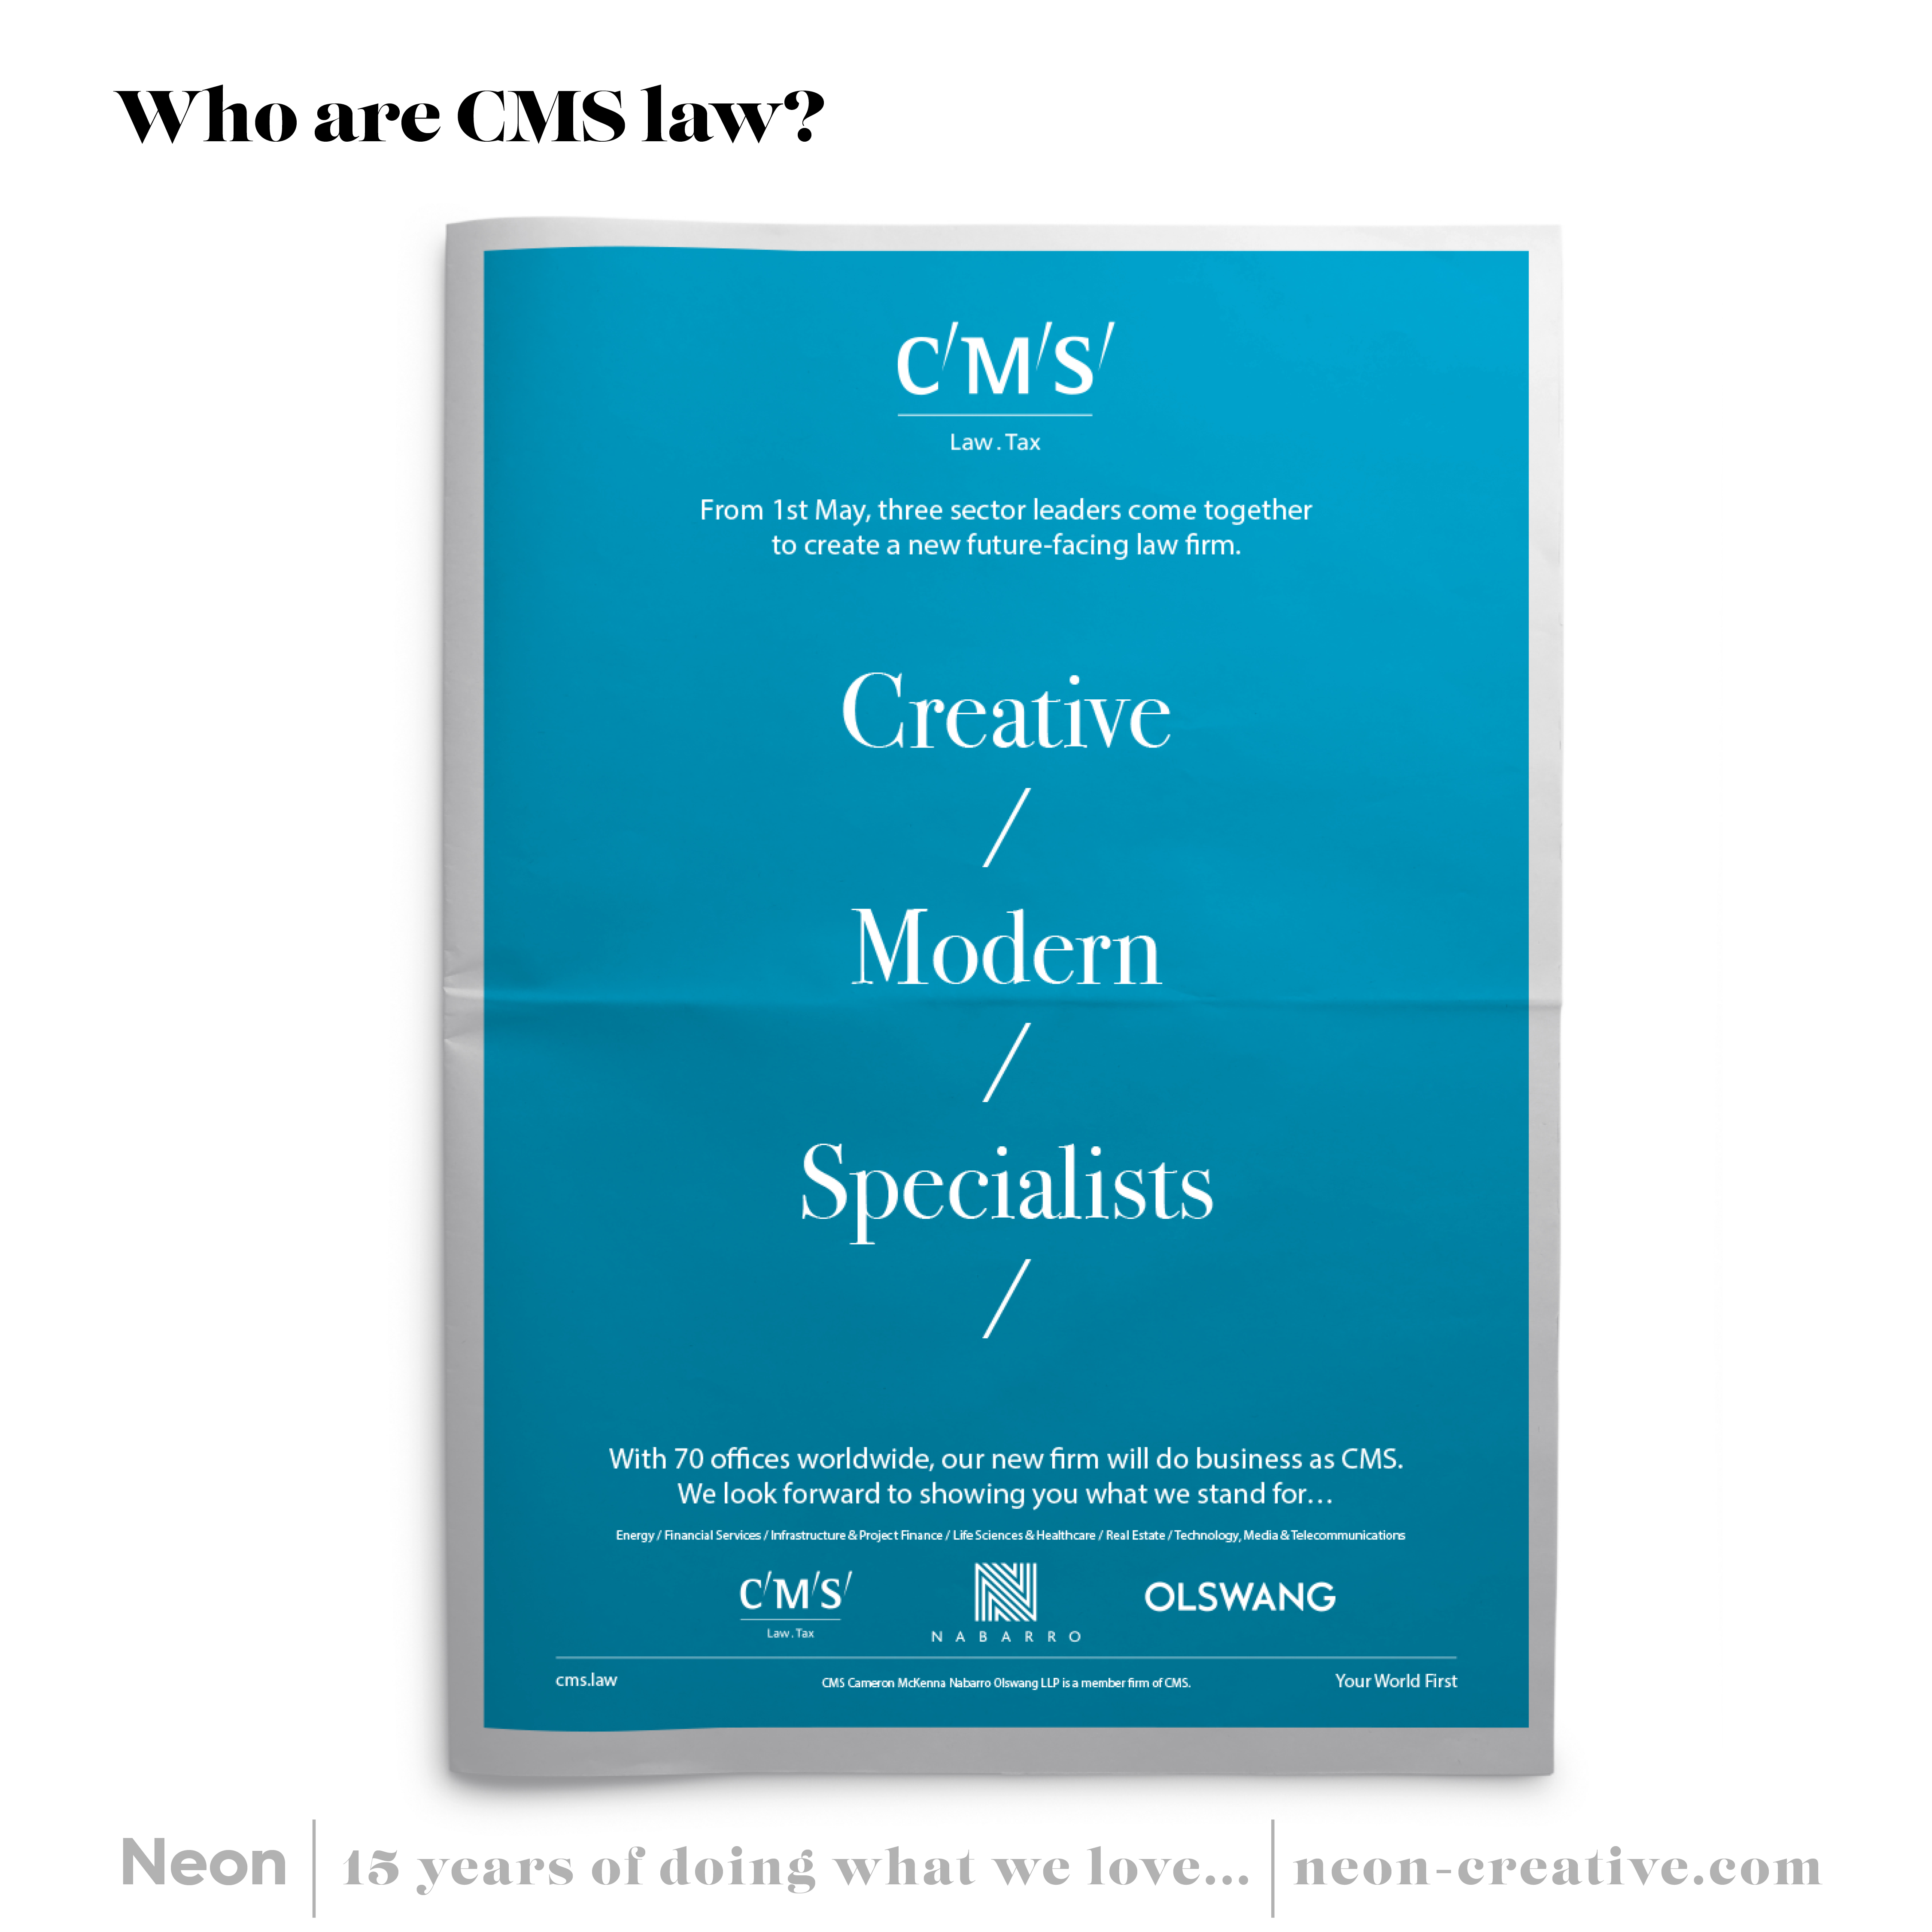 CMS law advertising campaign by Neon brand consultancy